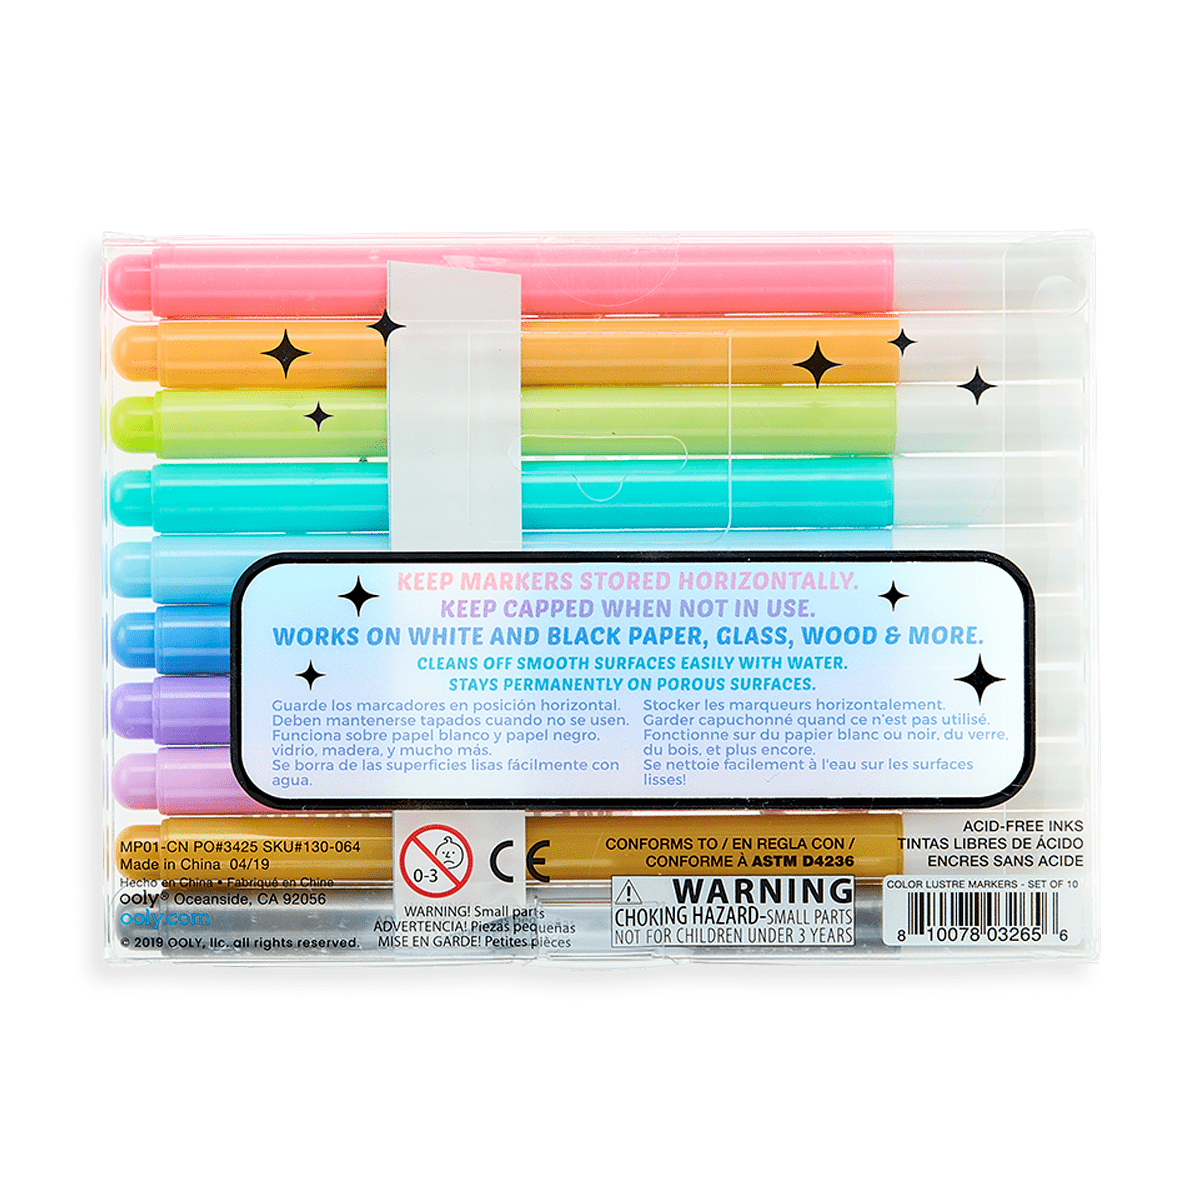 OOLY Color Lustre Metallic Brush Markers - Set of 10 by OOLY